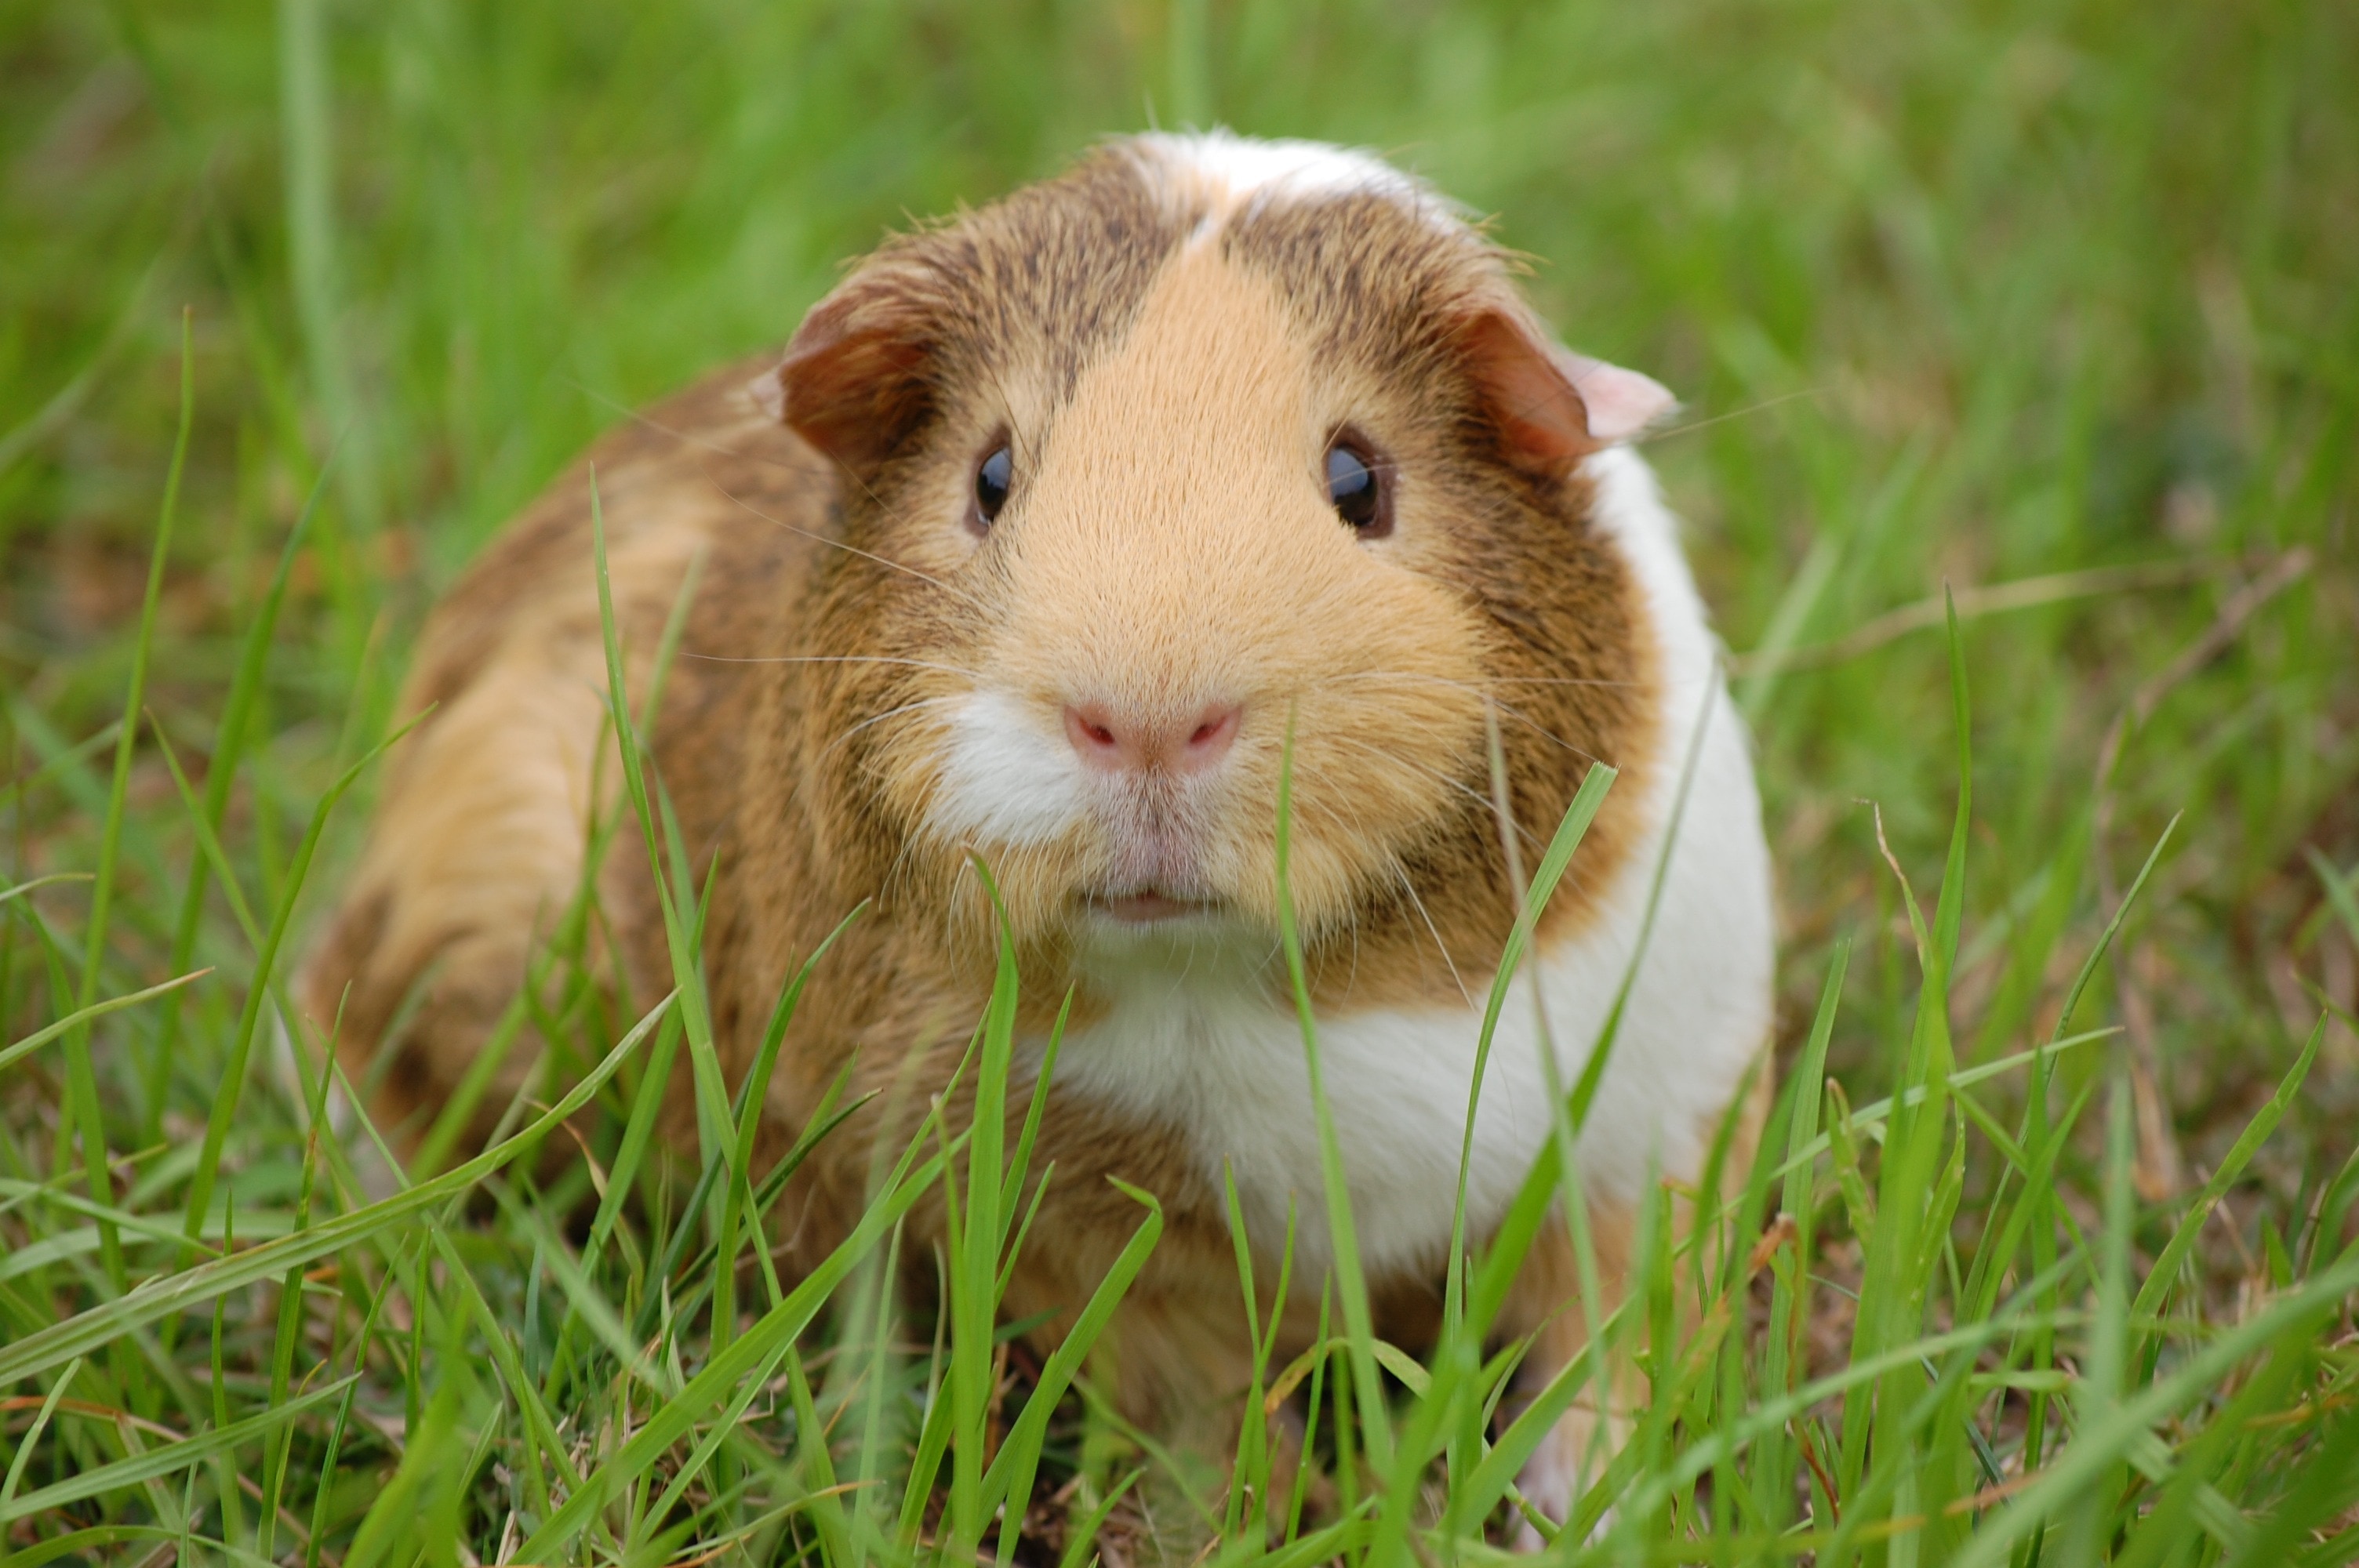 Wildlife photography of brown and white Guinea Pig